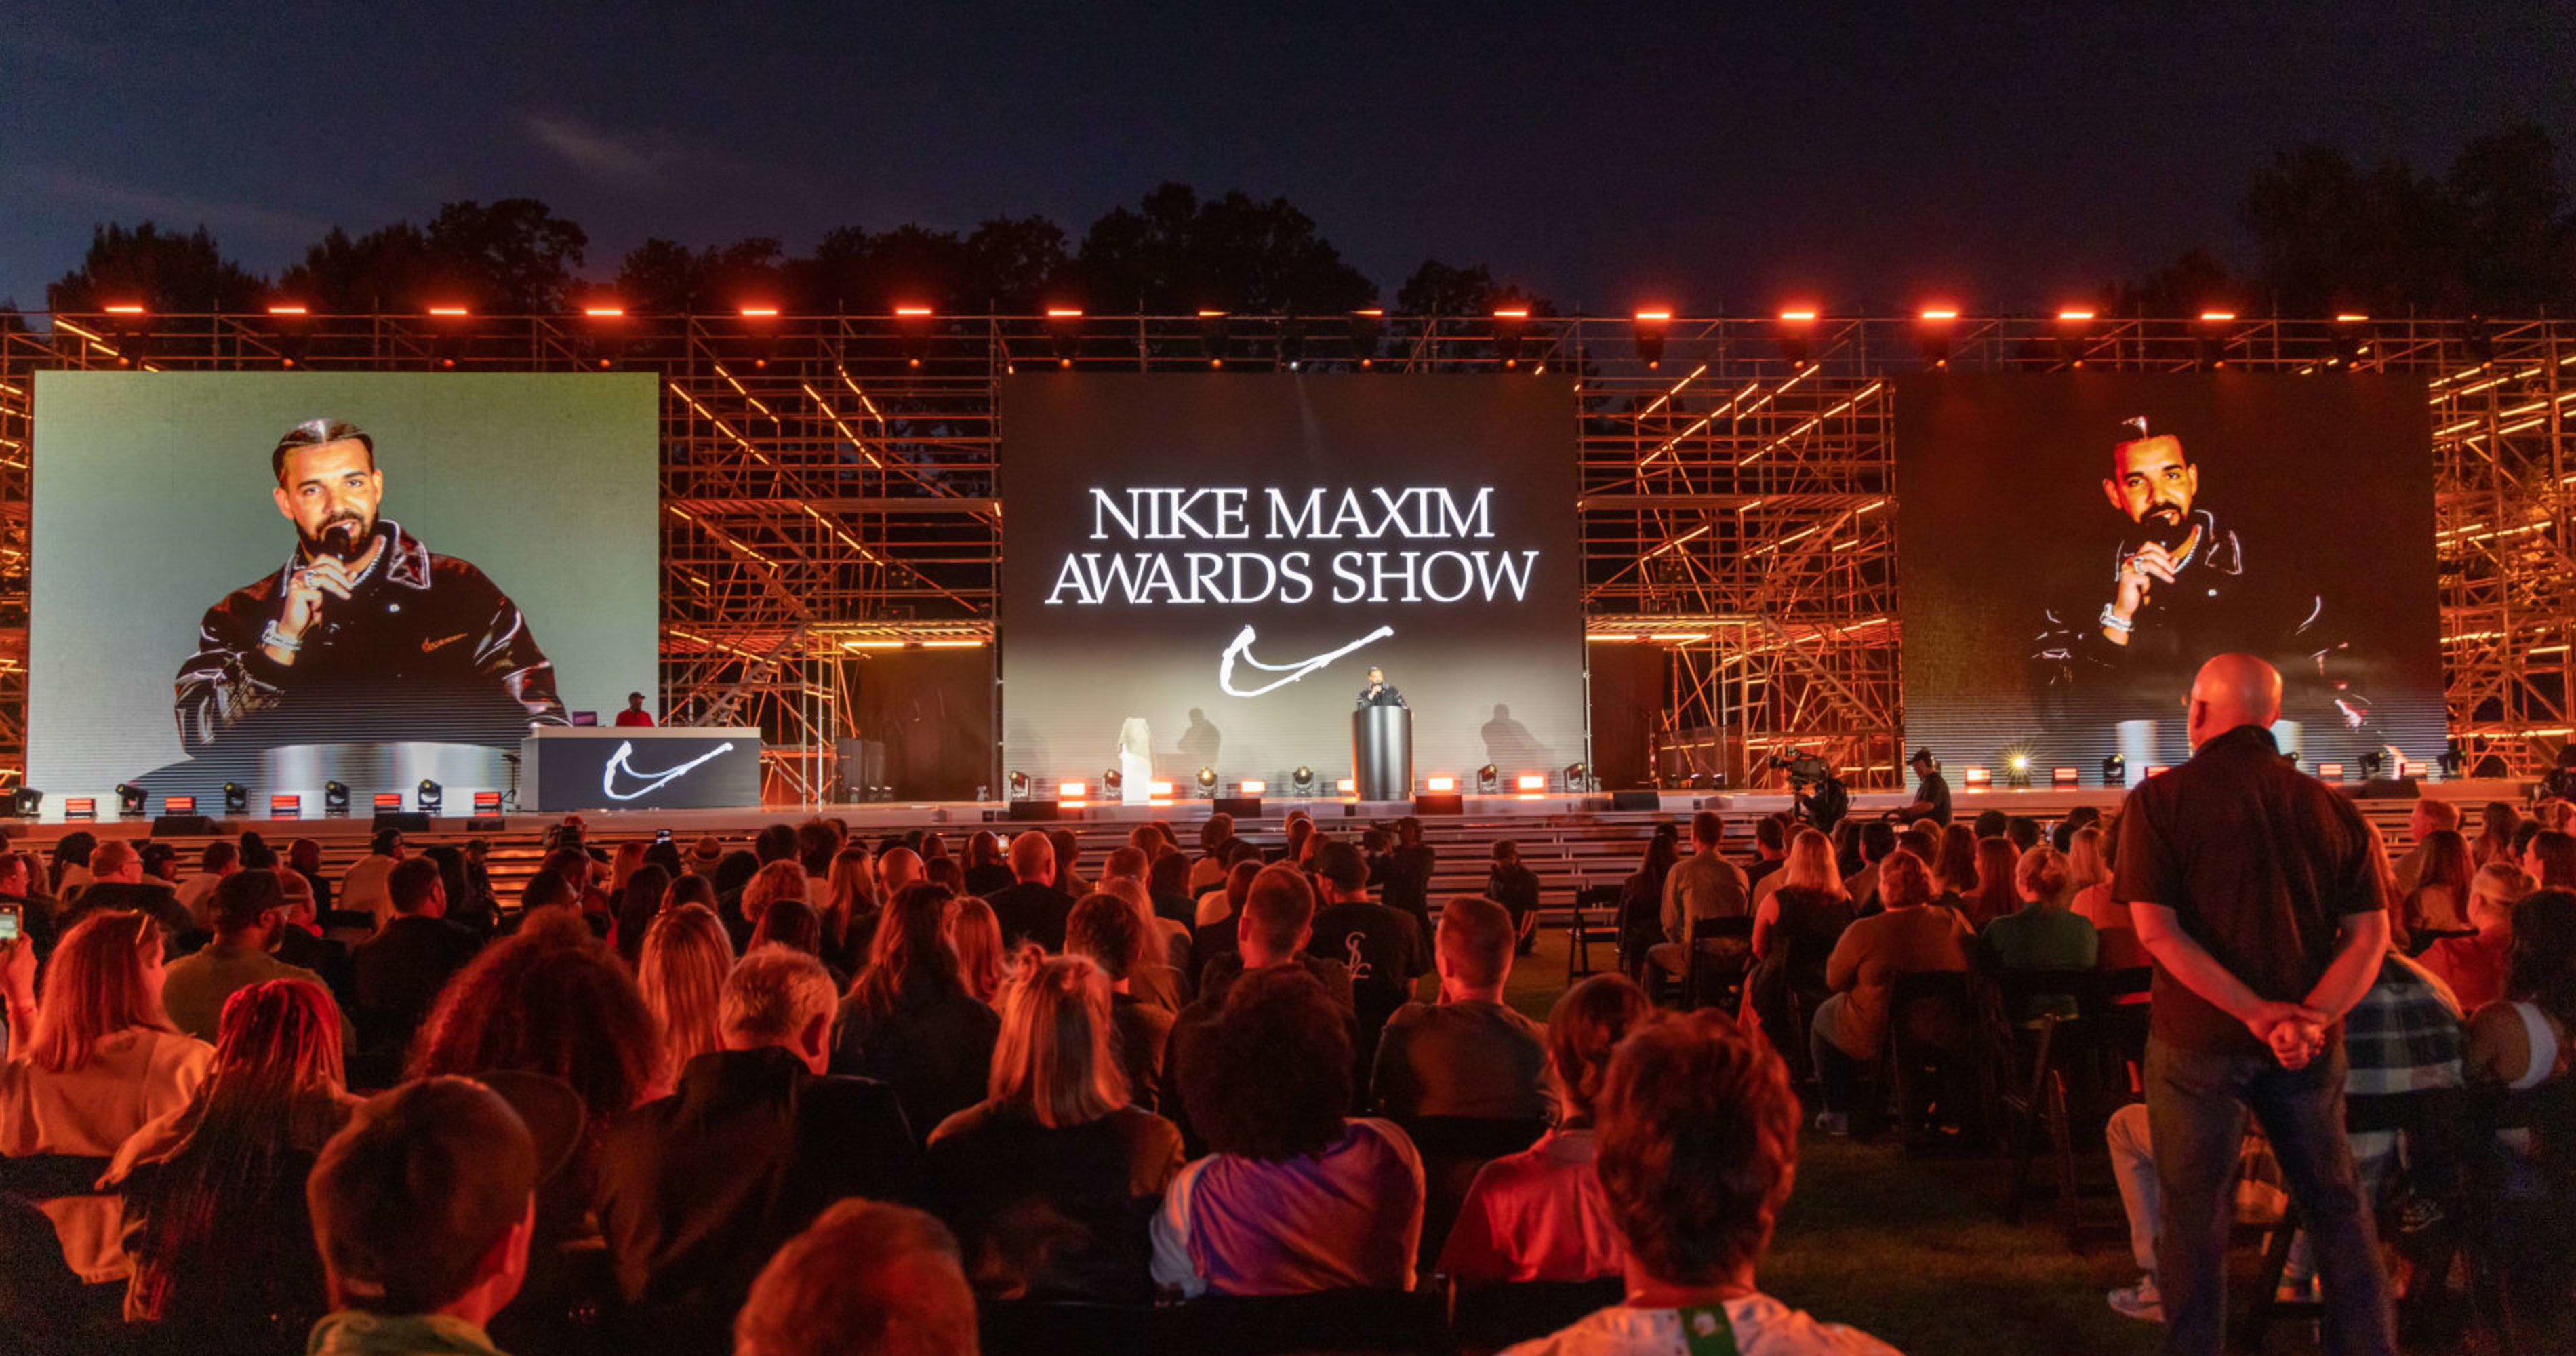 Nike announce “Off-Campus” London